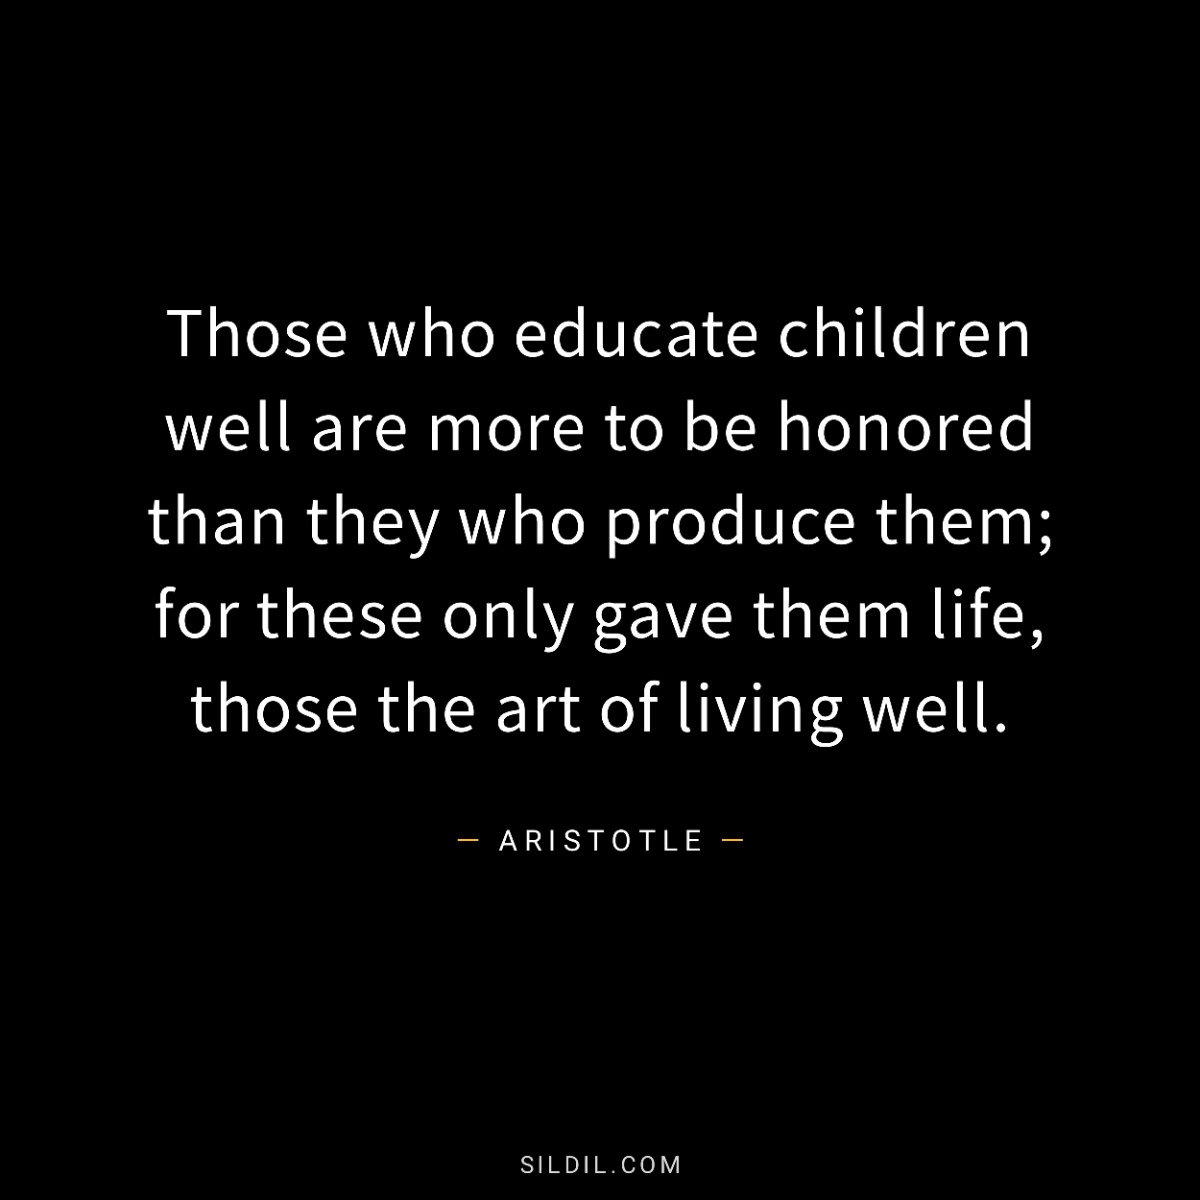 Those who educate children well are more to be honored than they who produce them; for these only gave them life, those the art of living well.